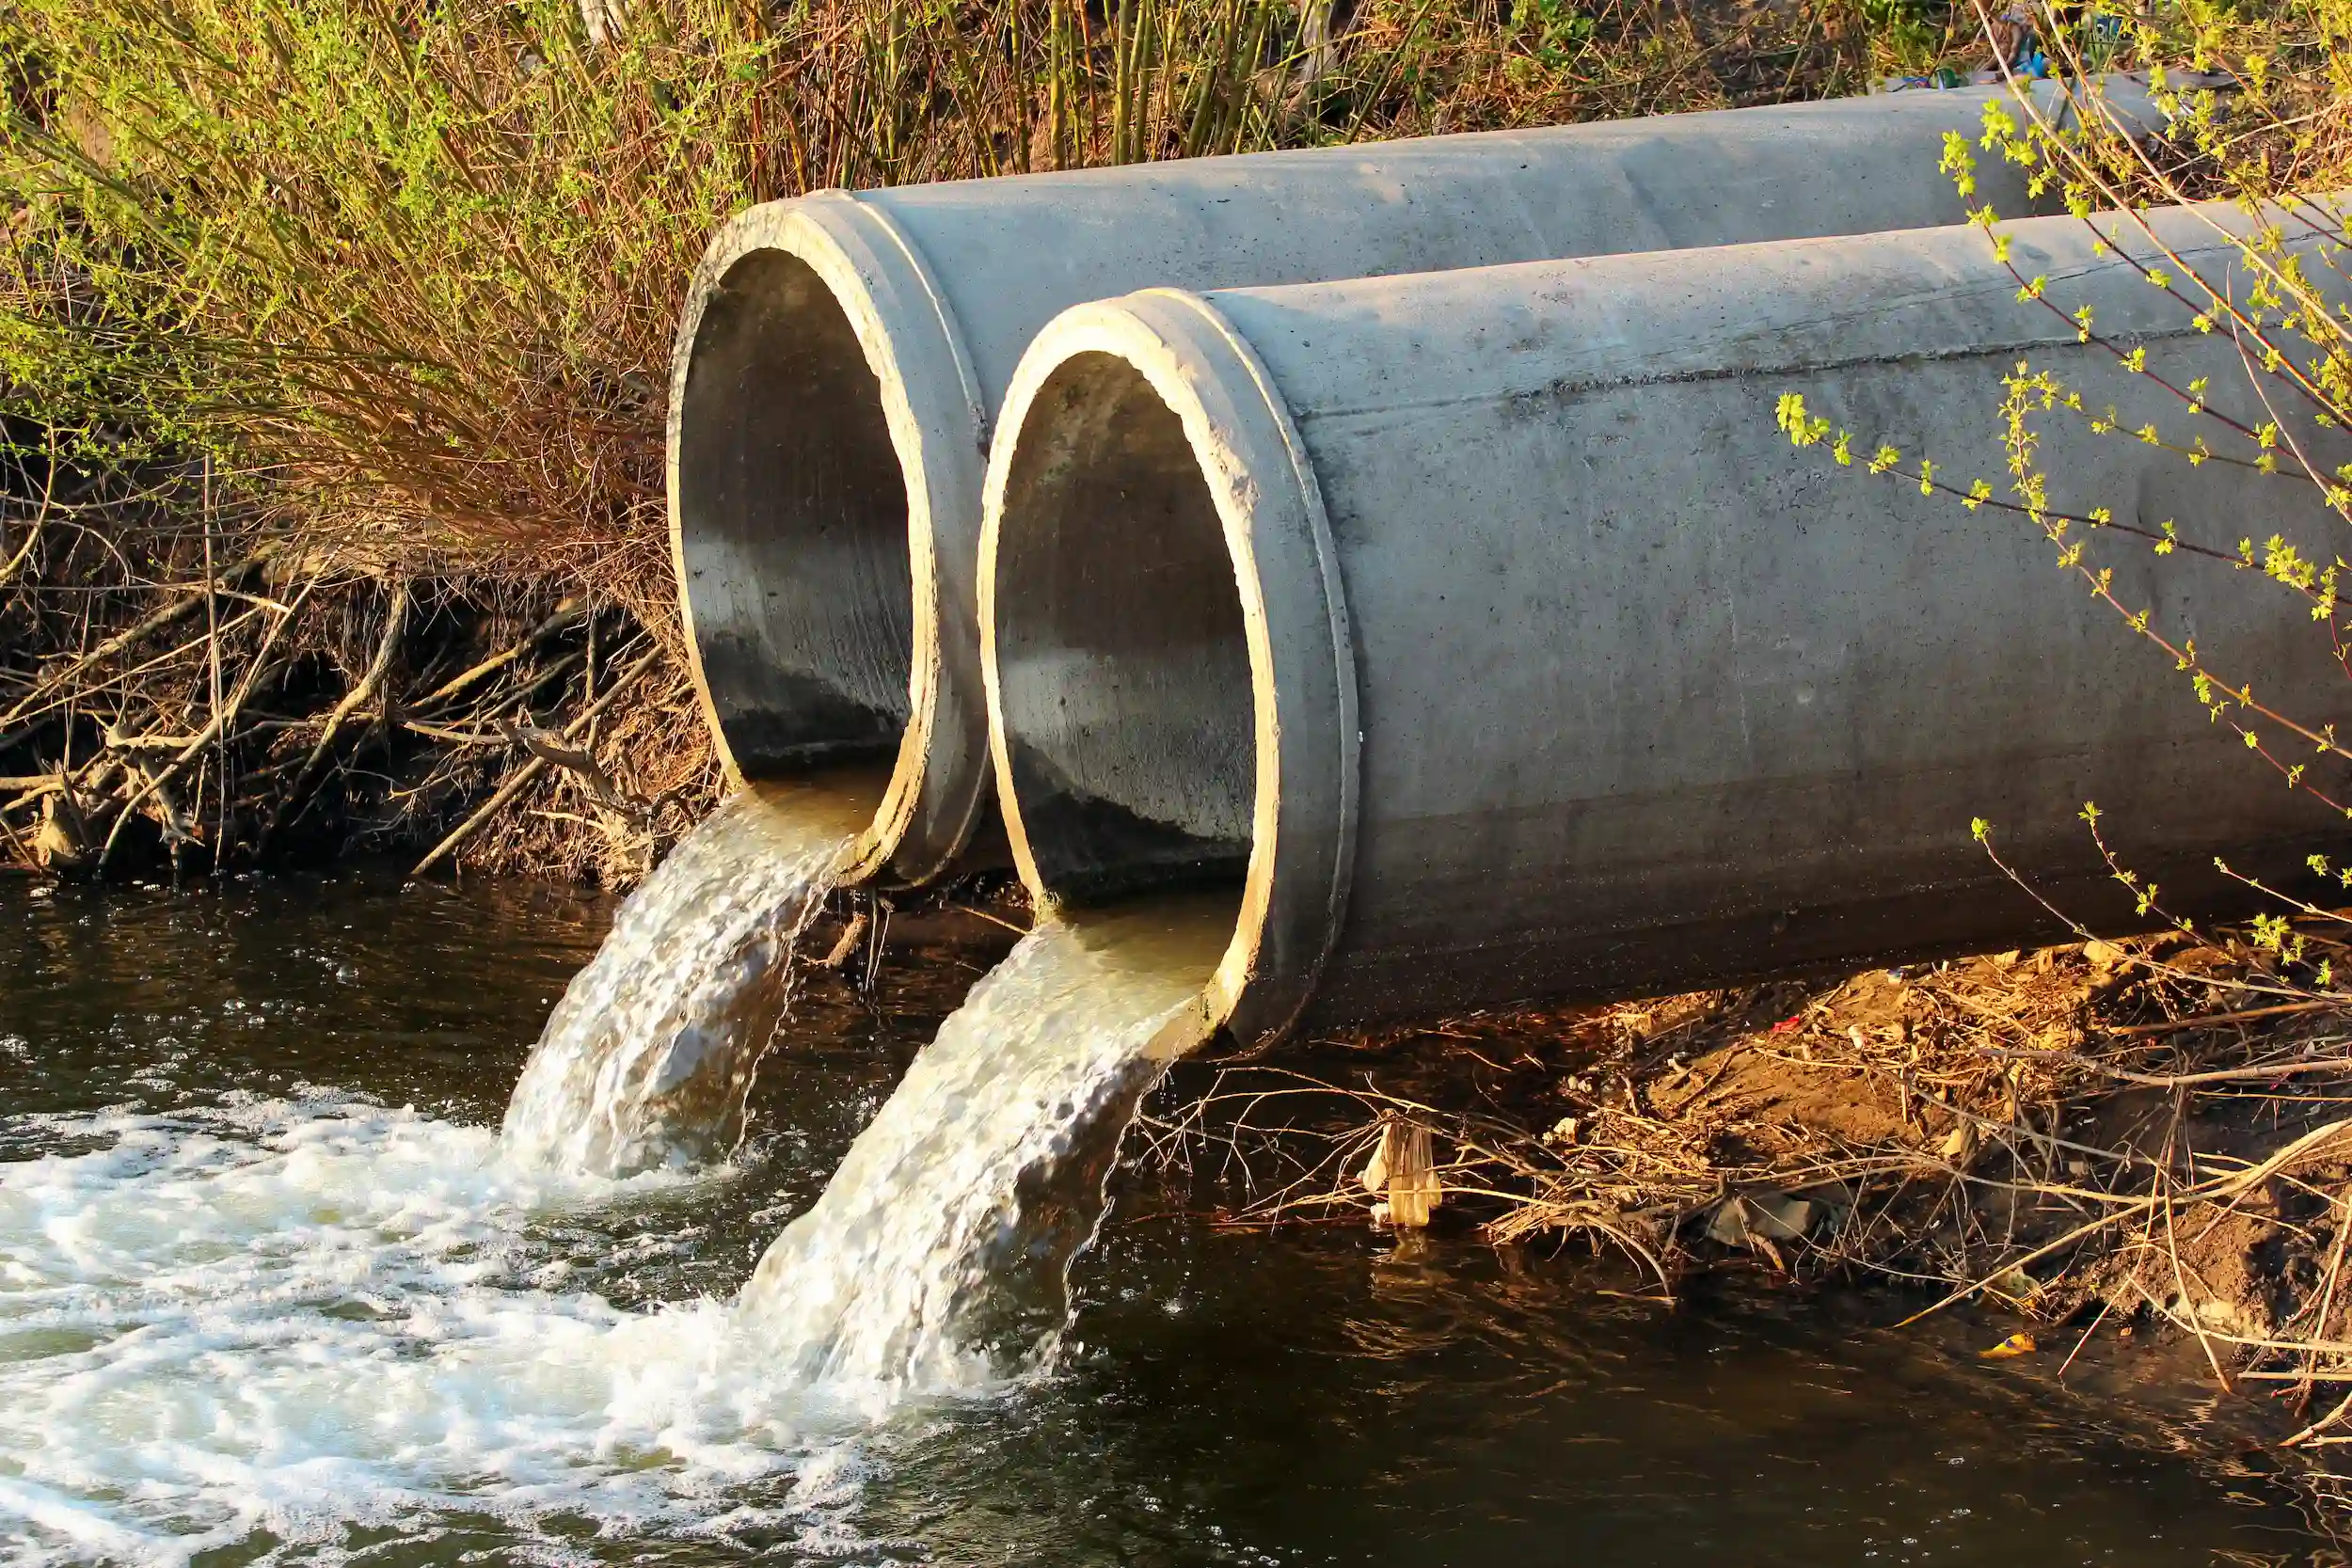 Sewage pipes discharging effluent into a river.